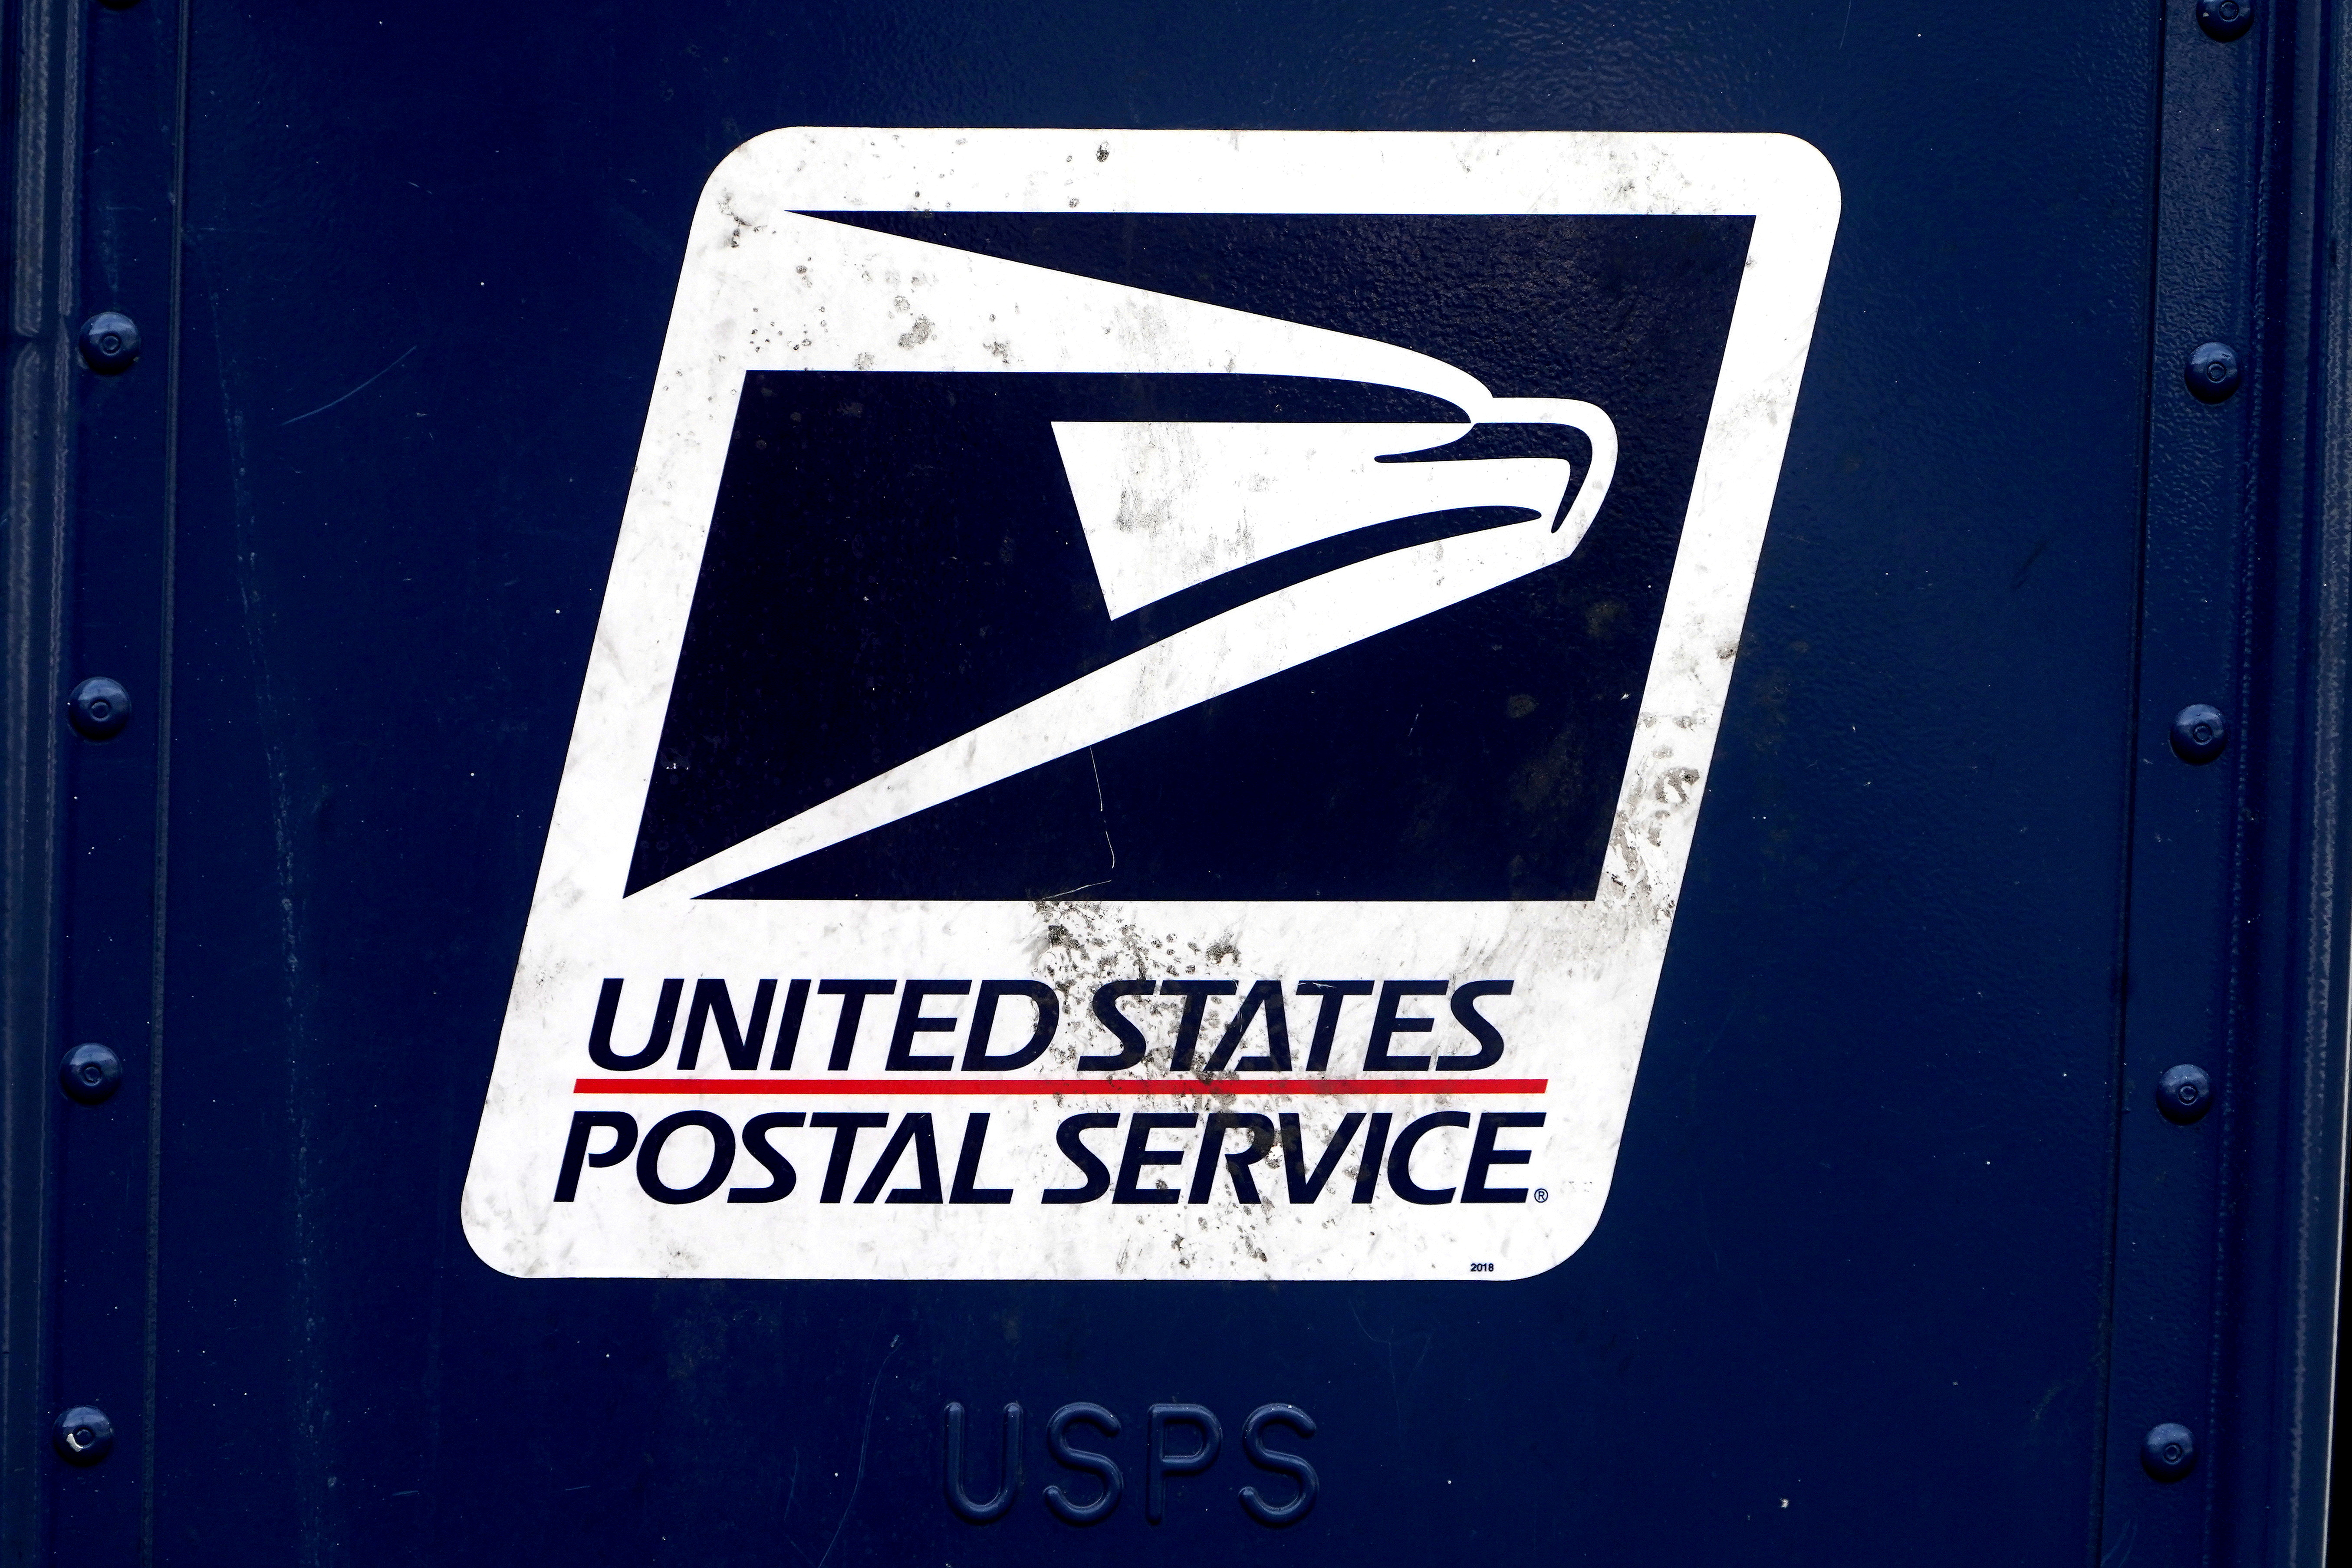 A U.S. Postal Service (USPS) logo is pictured on a mail box in the Manhattan borough of New York City, New York, U.S., August 21, 2020. REUTERS/Carlo Allegri/File Photo